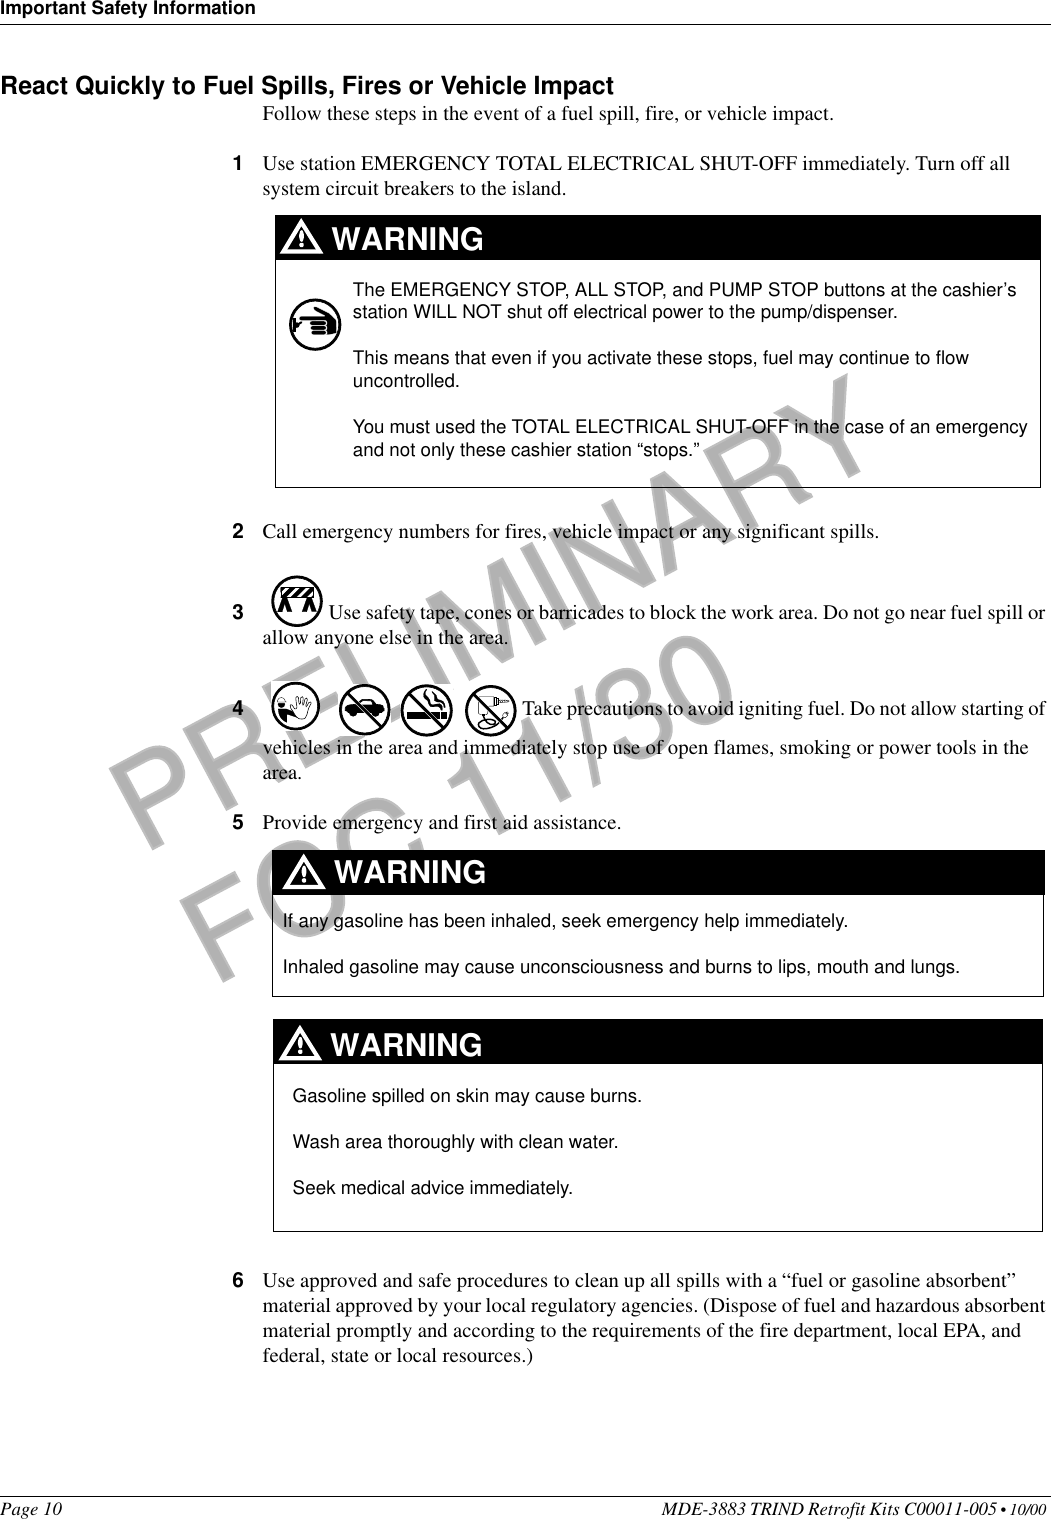 Important Safety InformationPage 10 MDE-3883 TRIND Retrofit Kits C00011-005 • 10/00 PRELIMINARYFCC 11/30React Quickly to Fuel Spills, Fires or Vehicle ImpactFollow these steps in the event of a fuel spill, fire, or vehicle impact.1Use station EMERGENCY TOTAL ELECTRICAL SHUT-OFF immediately. Turn off all system circuit breakers to the island.2Call emergency numbers for fires, vehicle impact or any significant spills. 3 Use safety tape, cones or barricades to block the work area. Do not go near fuel spill or allow anyone else in the area. 4 Take precautions to avoid igniting fuel. Do not allow starting of vehicles in the area and immediately stop use of open flames, smoking or power tools in the area.5Provide emergency and first aid assistance. 6Use approved and safe procedures to clean up all spills with a “fuel or gasoline absorbent” material approved by your local regulatory agencies. (Dispose of fuel and hazardous absorbent material promptly and according to the requirements of the fire department, local EPA, and federal, state or local resources.)The EMERGENCY STOP, ALL STOP, and PUMP STOP buttons at the cashier’s station WILL NOT shut off electrical power to the pump/dispenser. This means that even if you activate these stops, fuel may continue to flow uncontrolled. You must used the TOTAL ELECTRICAL SHUT-OFF in the case of an emergency and not only these cashier station “stops.”WARNINGIf any gasoline has been inhaled, seek emergency help immediately. Inhaled gasoline may cause unconsciousness and burns to lips, mouth and lungs.WARNINGGasoline spilled on skin may cause burns.Wash area thoroughly with clean water. Seek medical advice immediately.WARNING